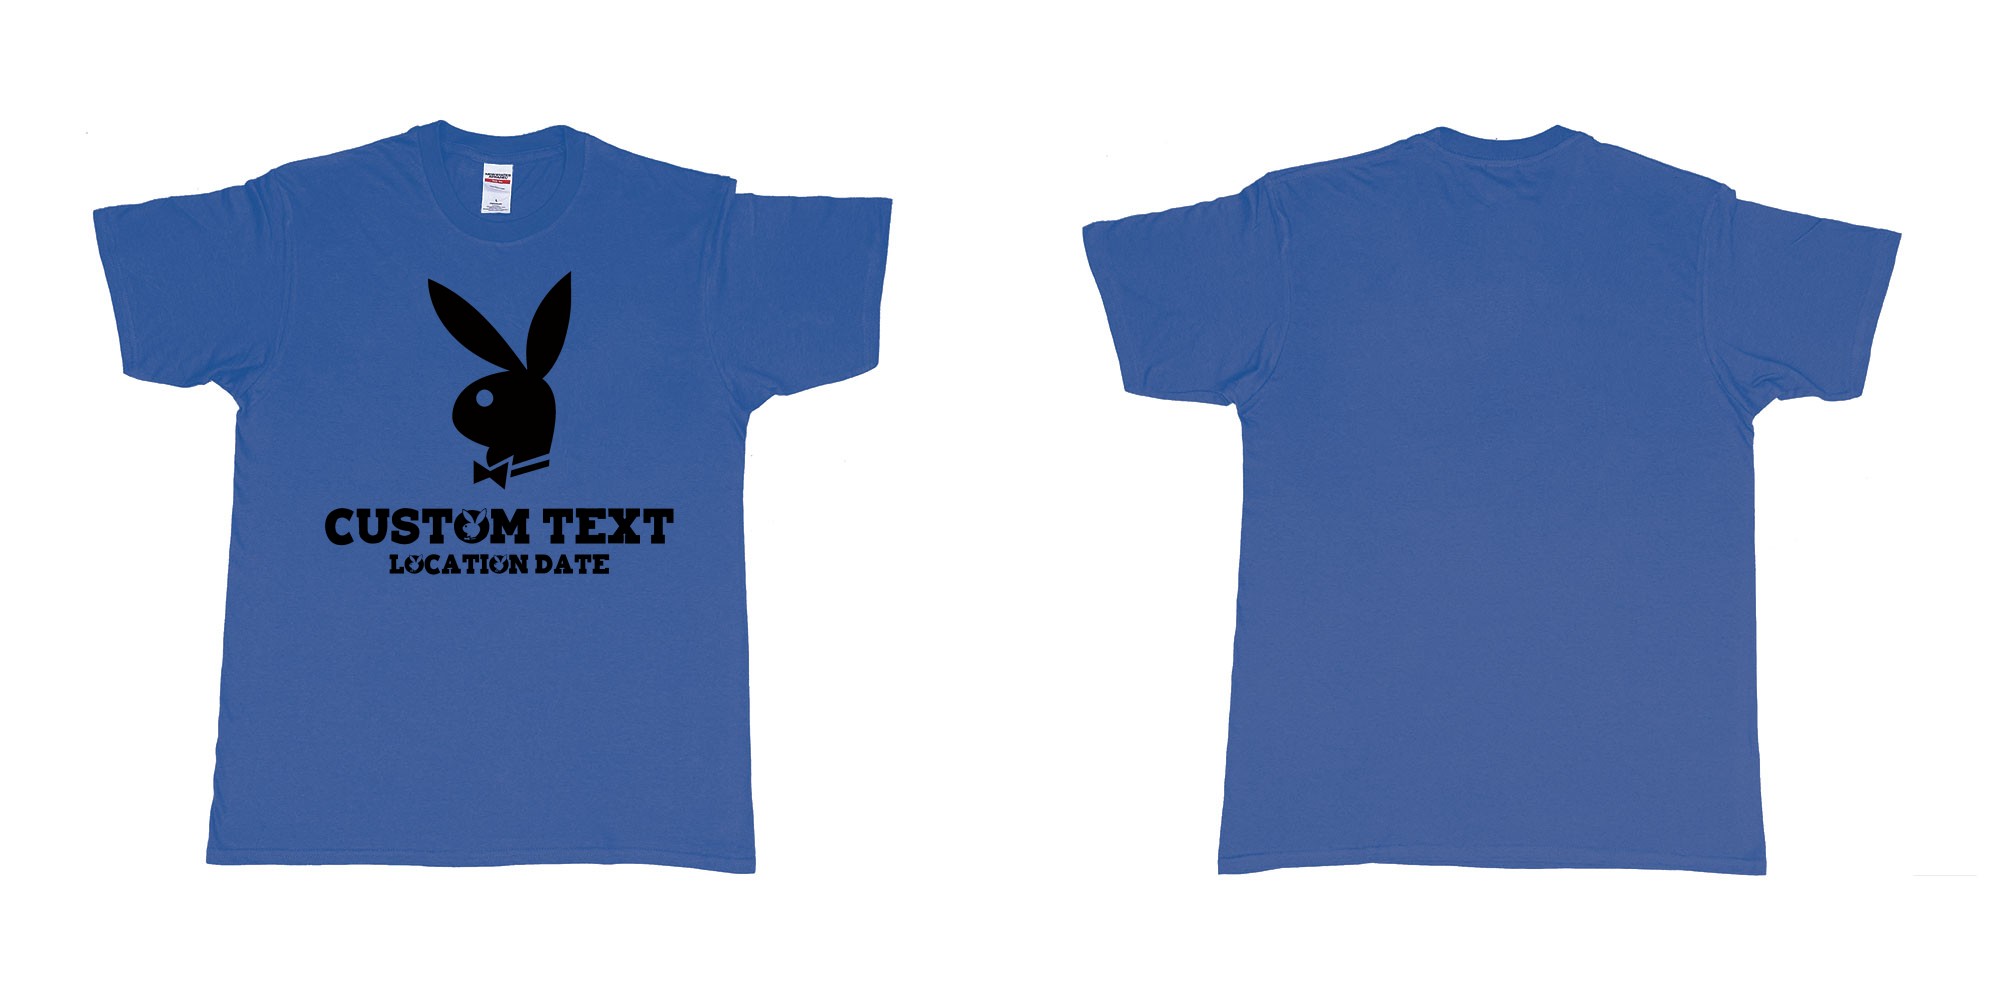 Custom tshirt design playboy playgirl custom text tshirt in fabric color royal-blue choice your own text made in Bali by The Pirate Way